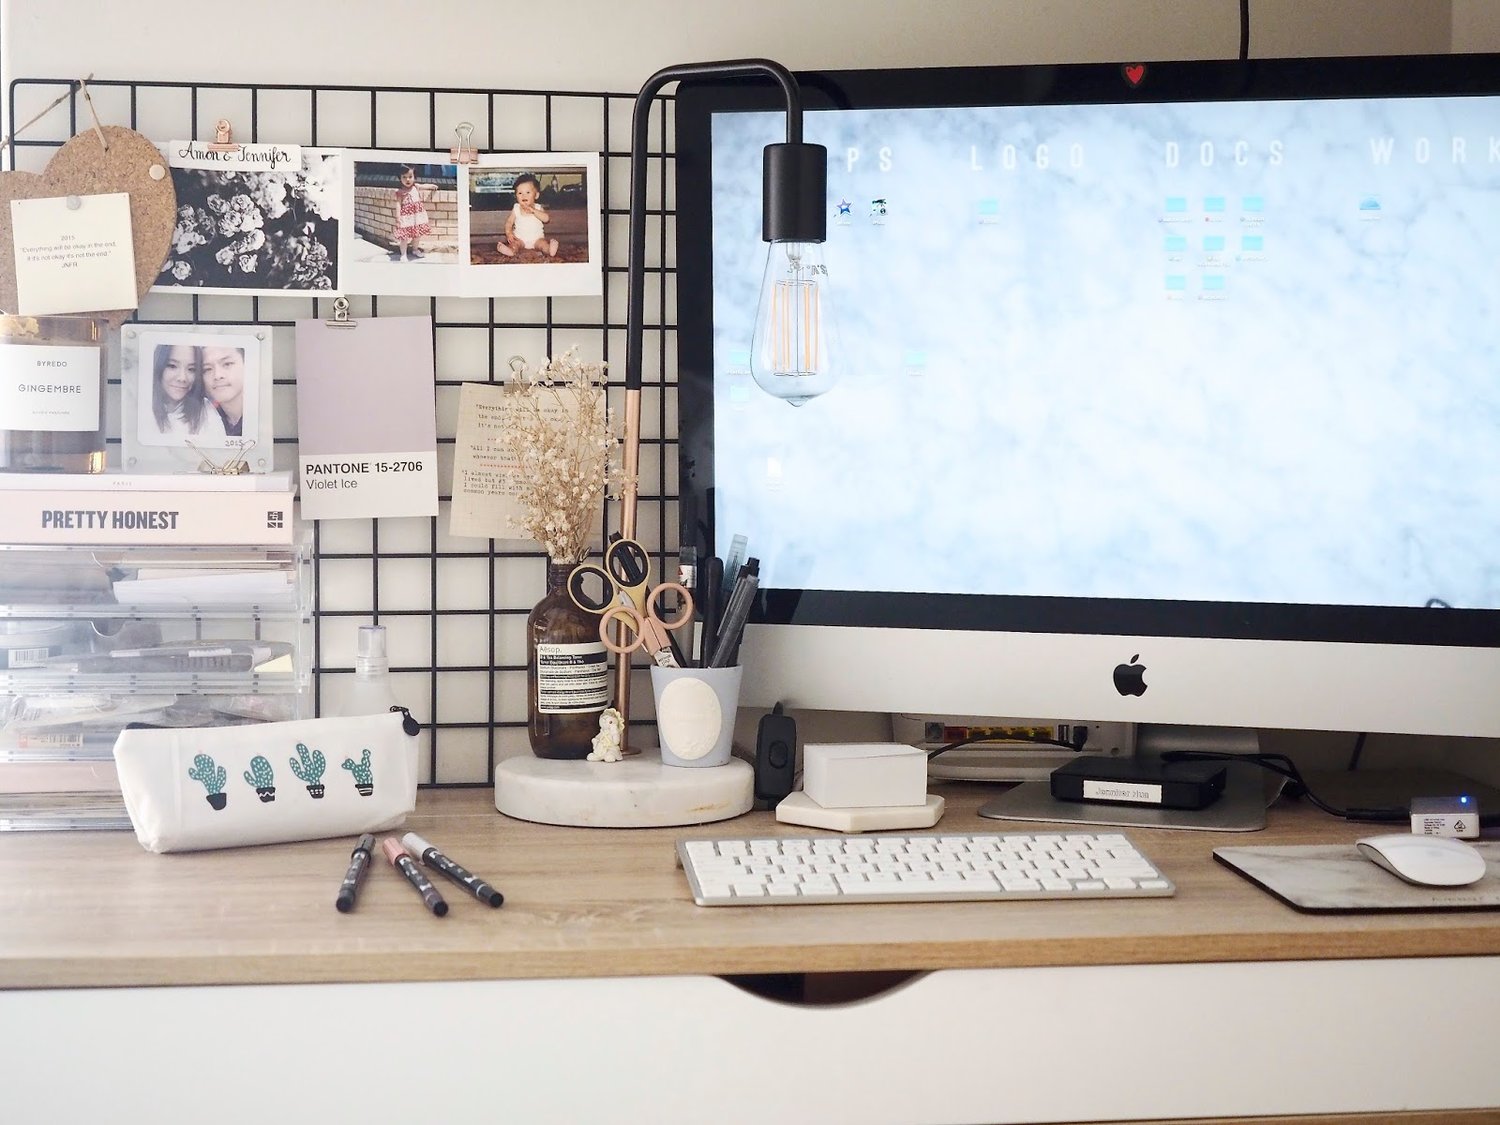 Cute Desk Decorating Ideas for an Aesthetic Homework Space